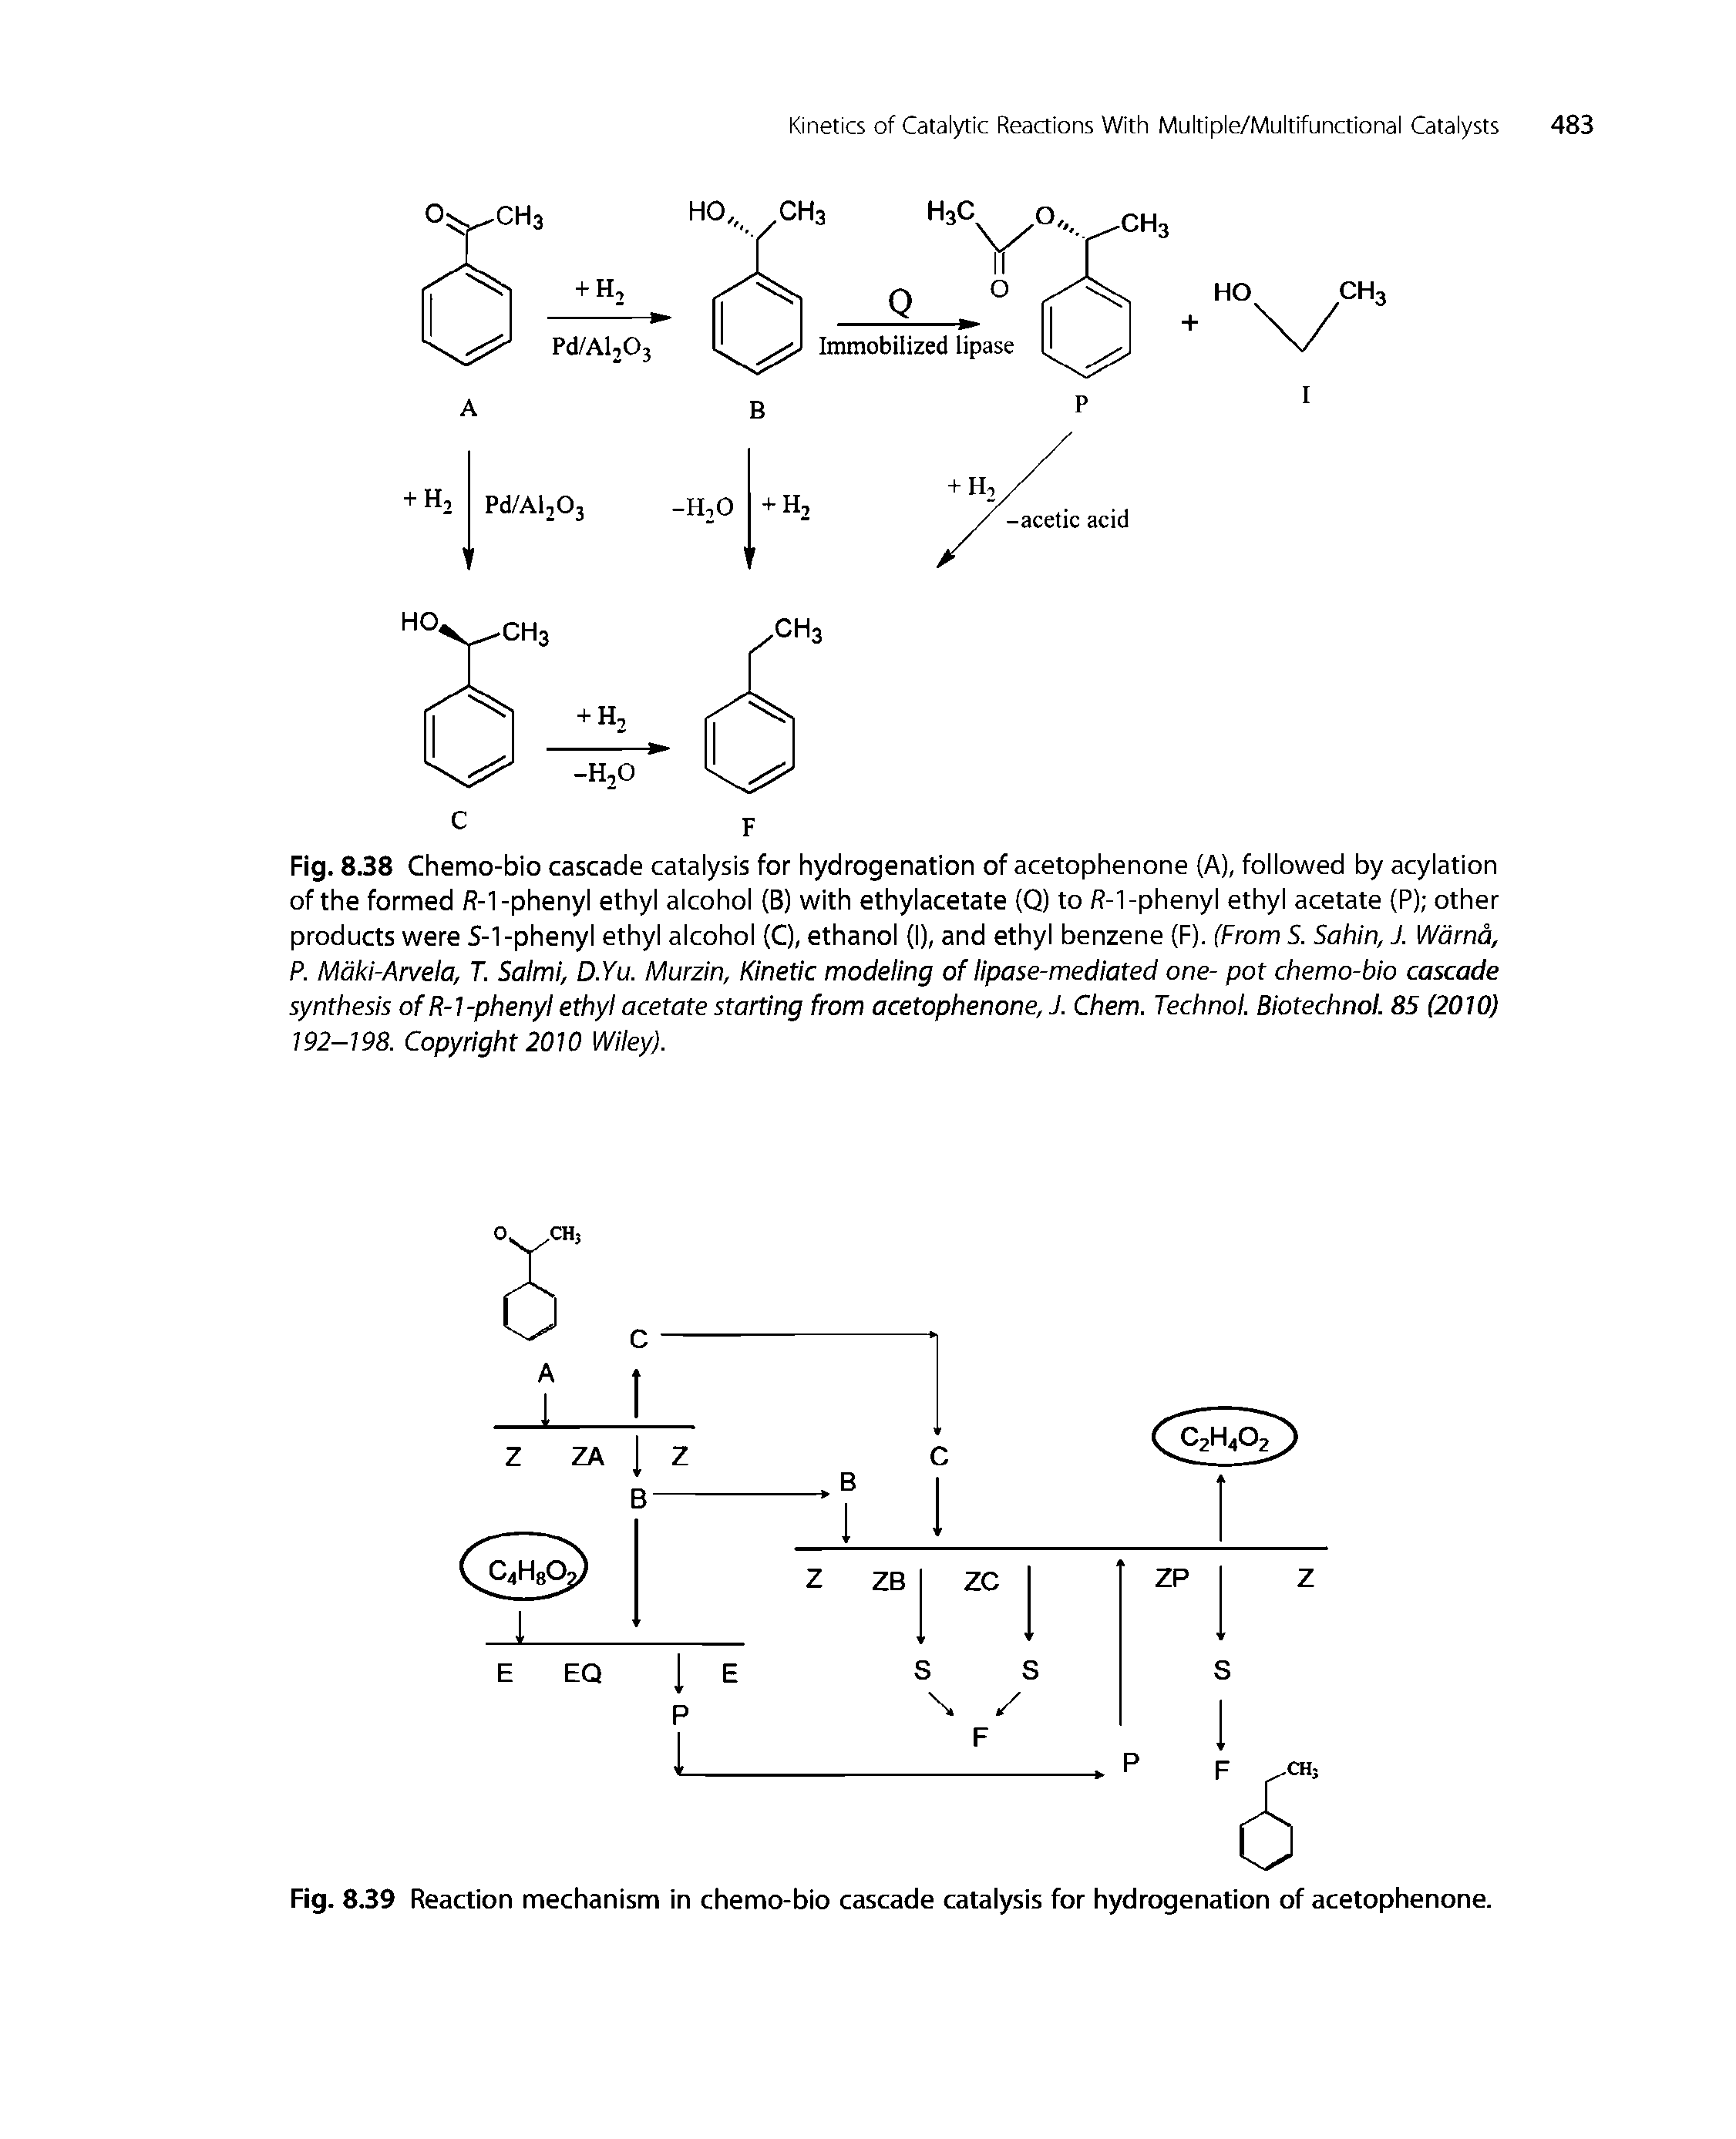 Fig. 8.39 Reaction mechanism in chemo-bio cascade catalysis for hydrogenation of acetophenone.